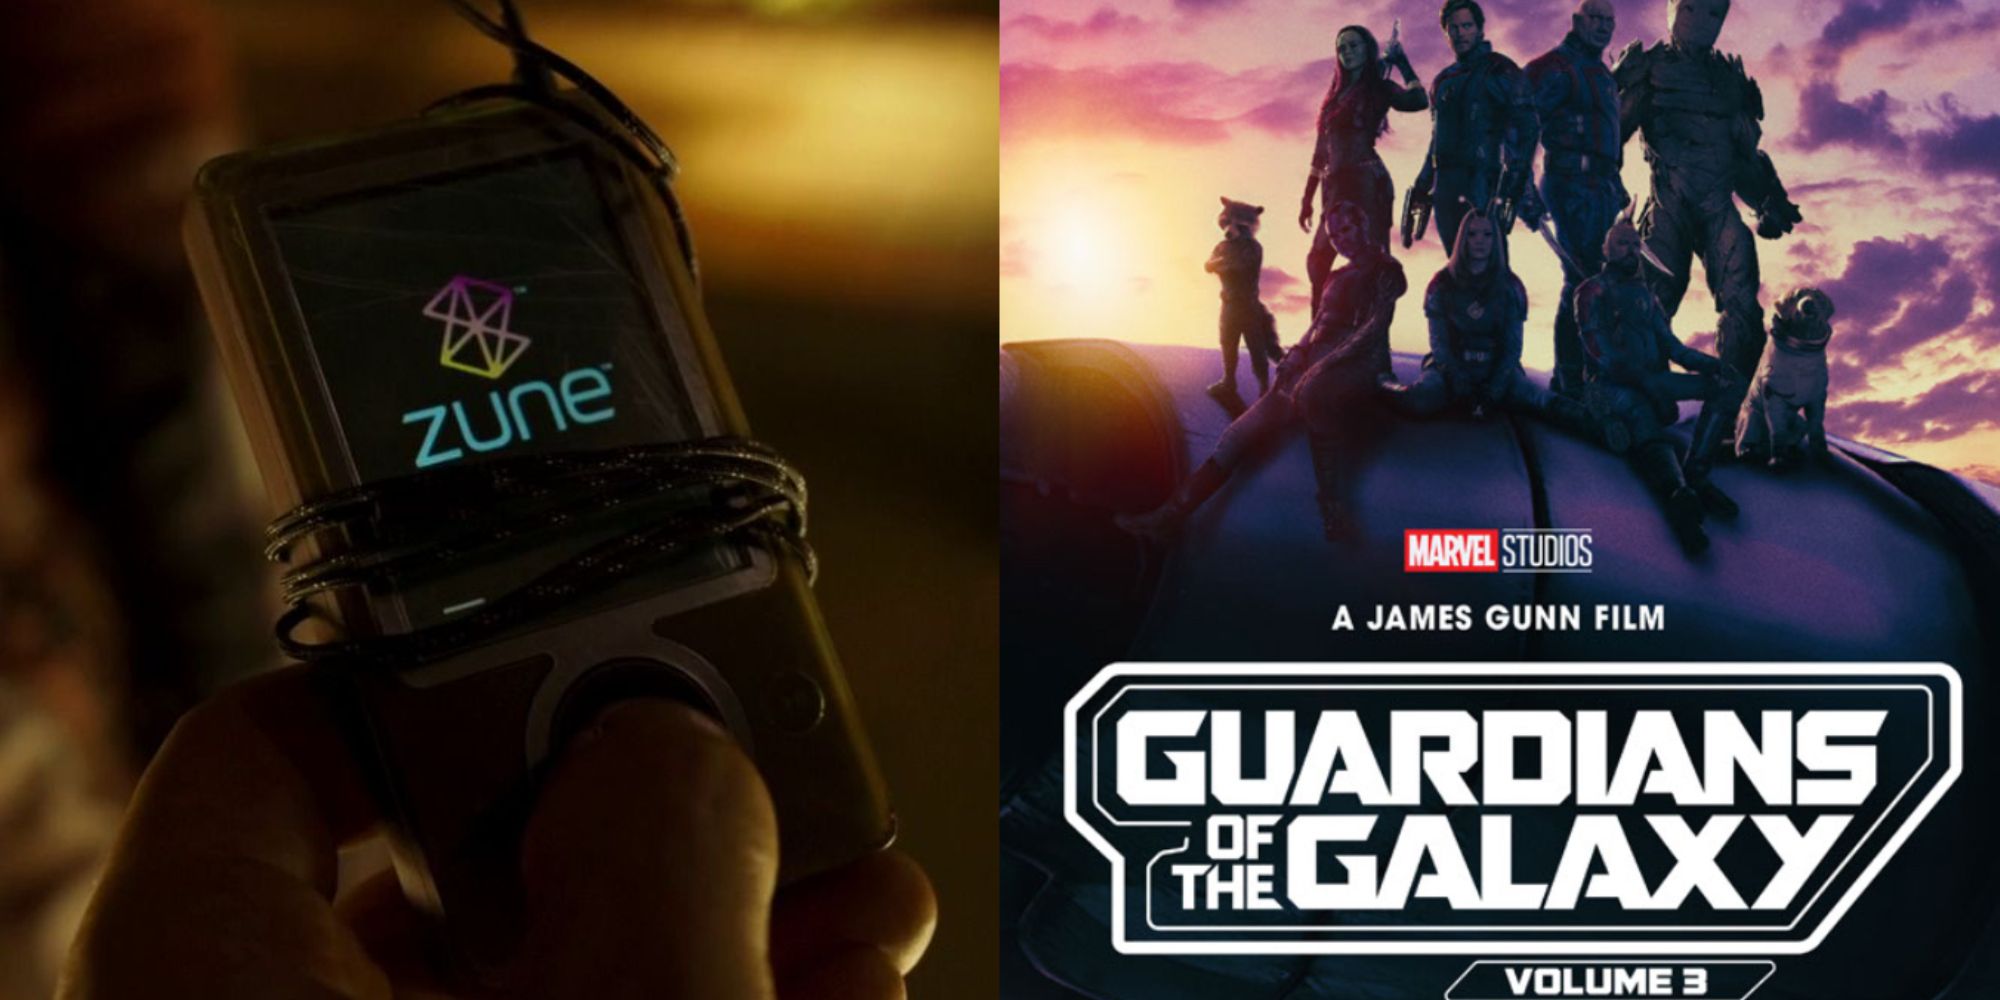 Split image of the Zune fron Guardians of the Galaxy Vol. 2 and the poster for Guardians of the Galaxy Vol. 3